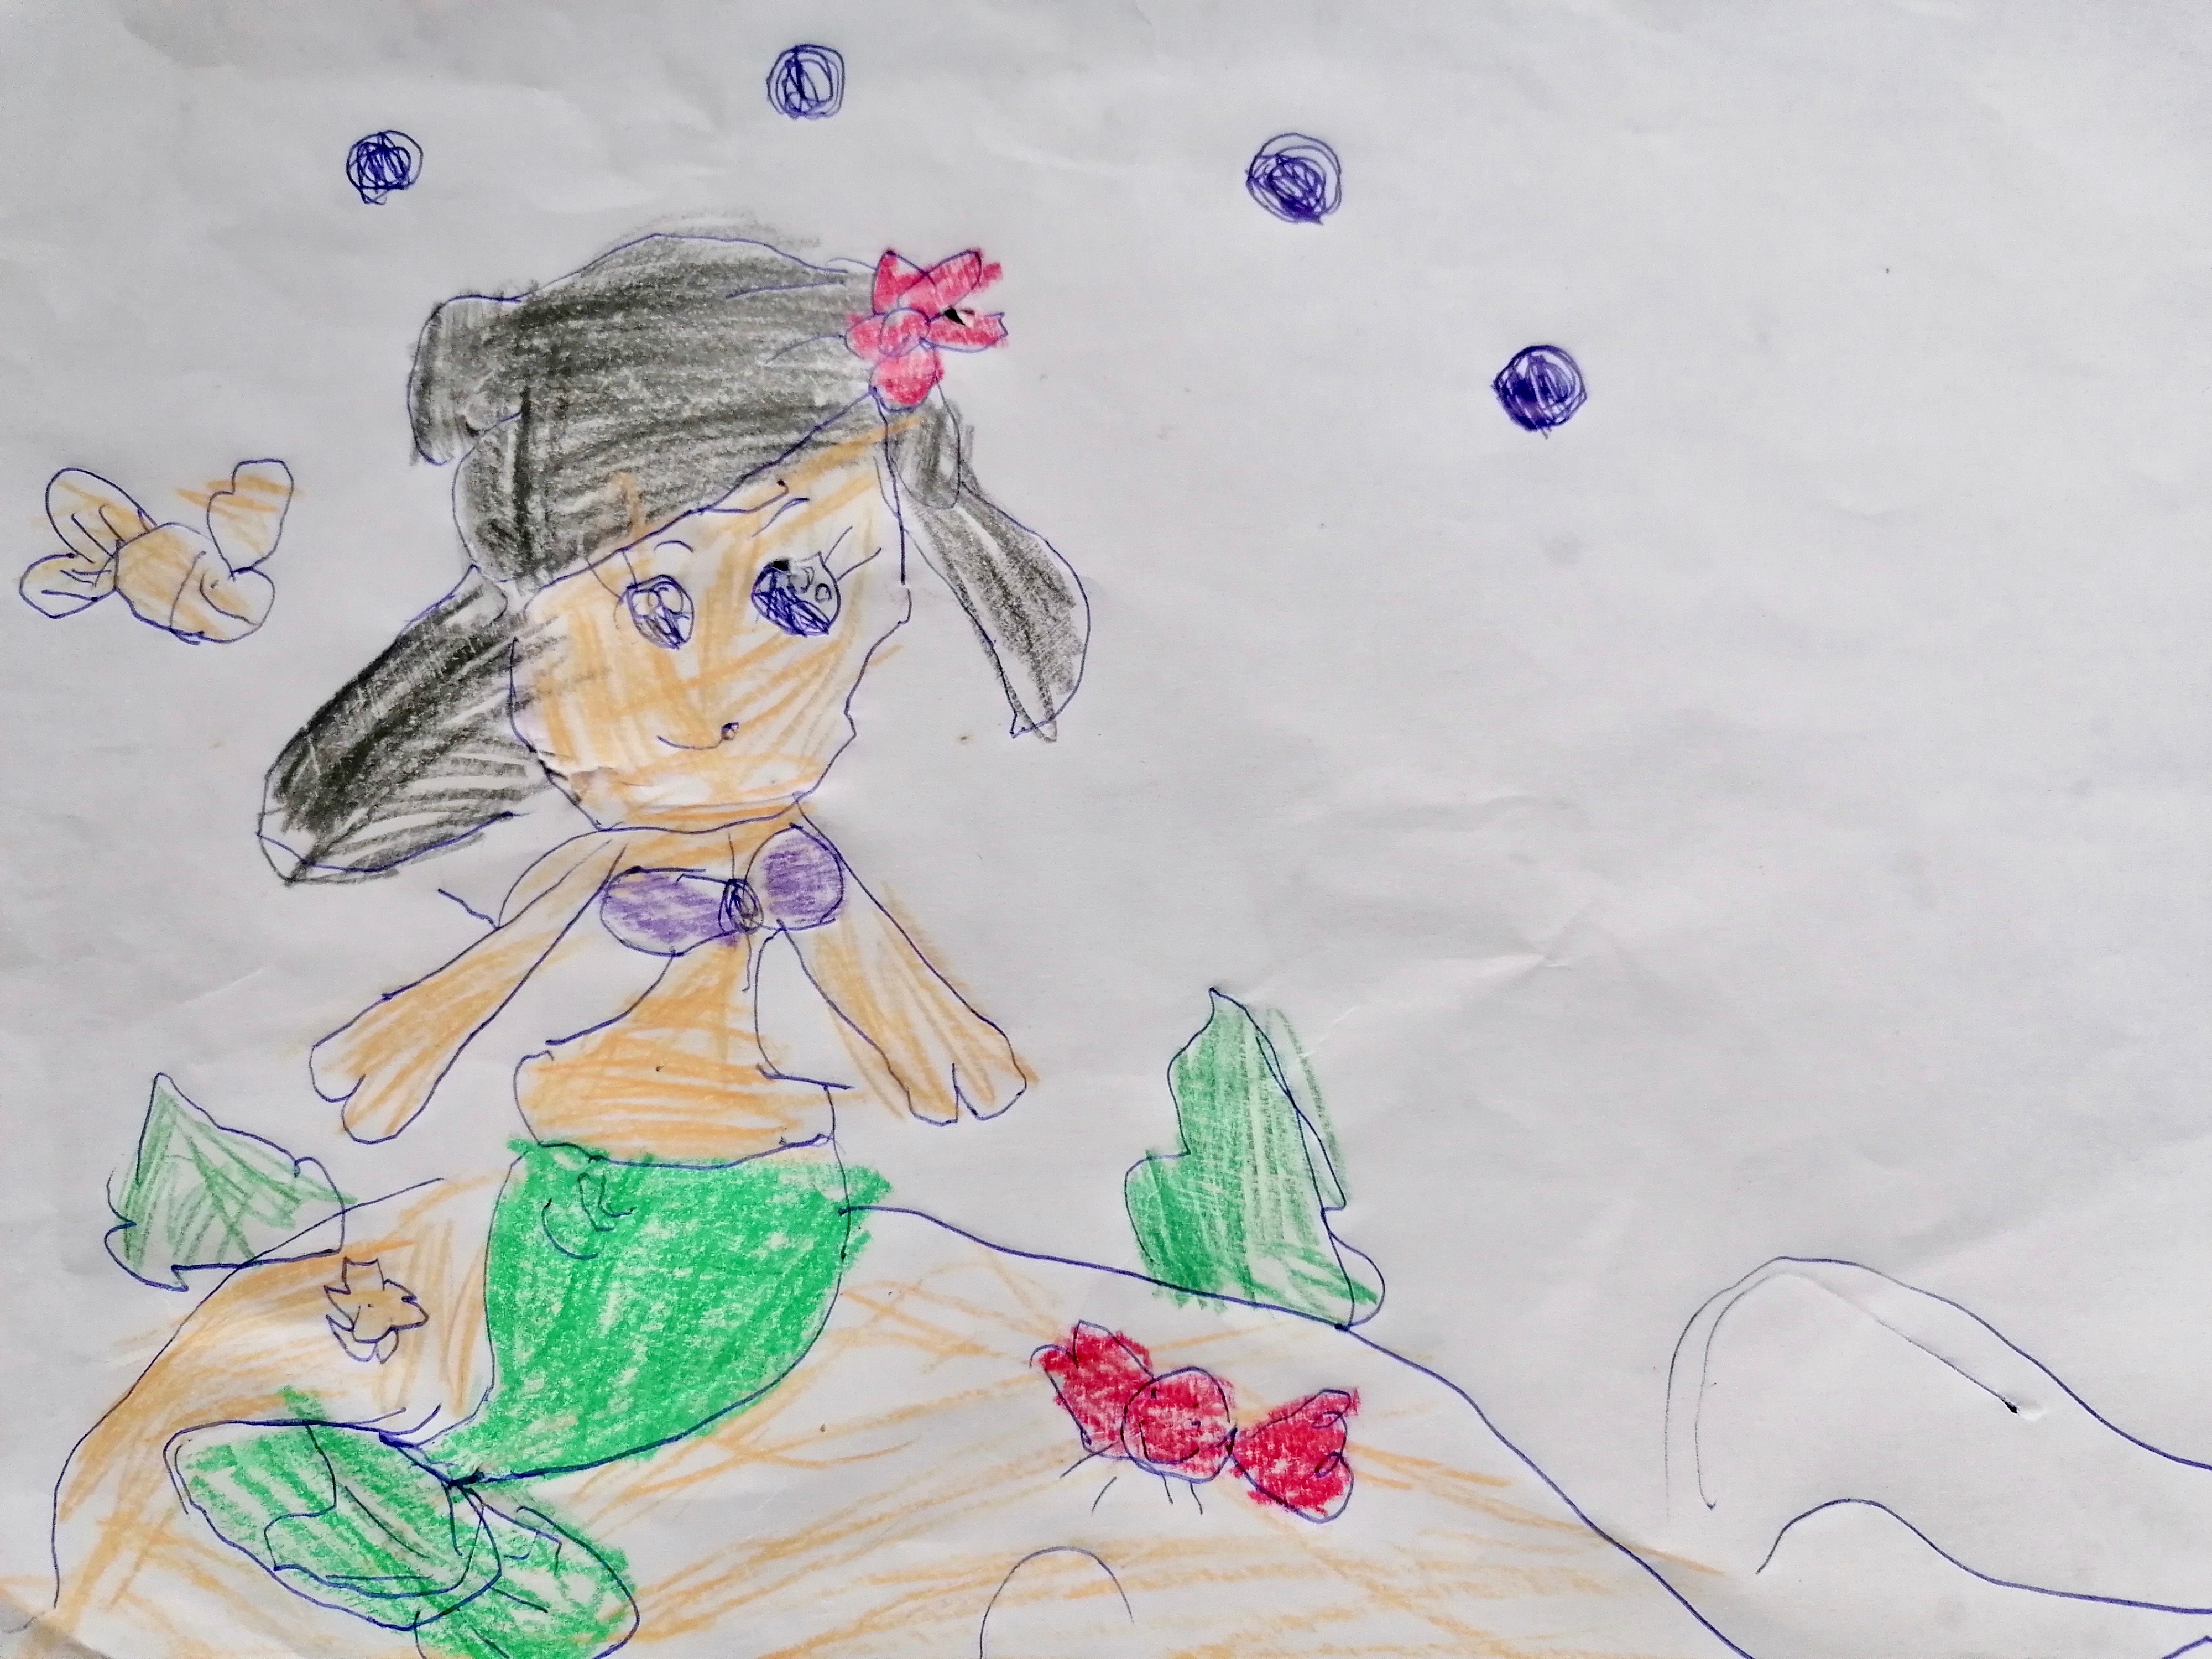 'Mermaid and her friends' by Catriona (5) from Cork